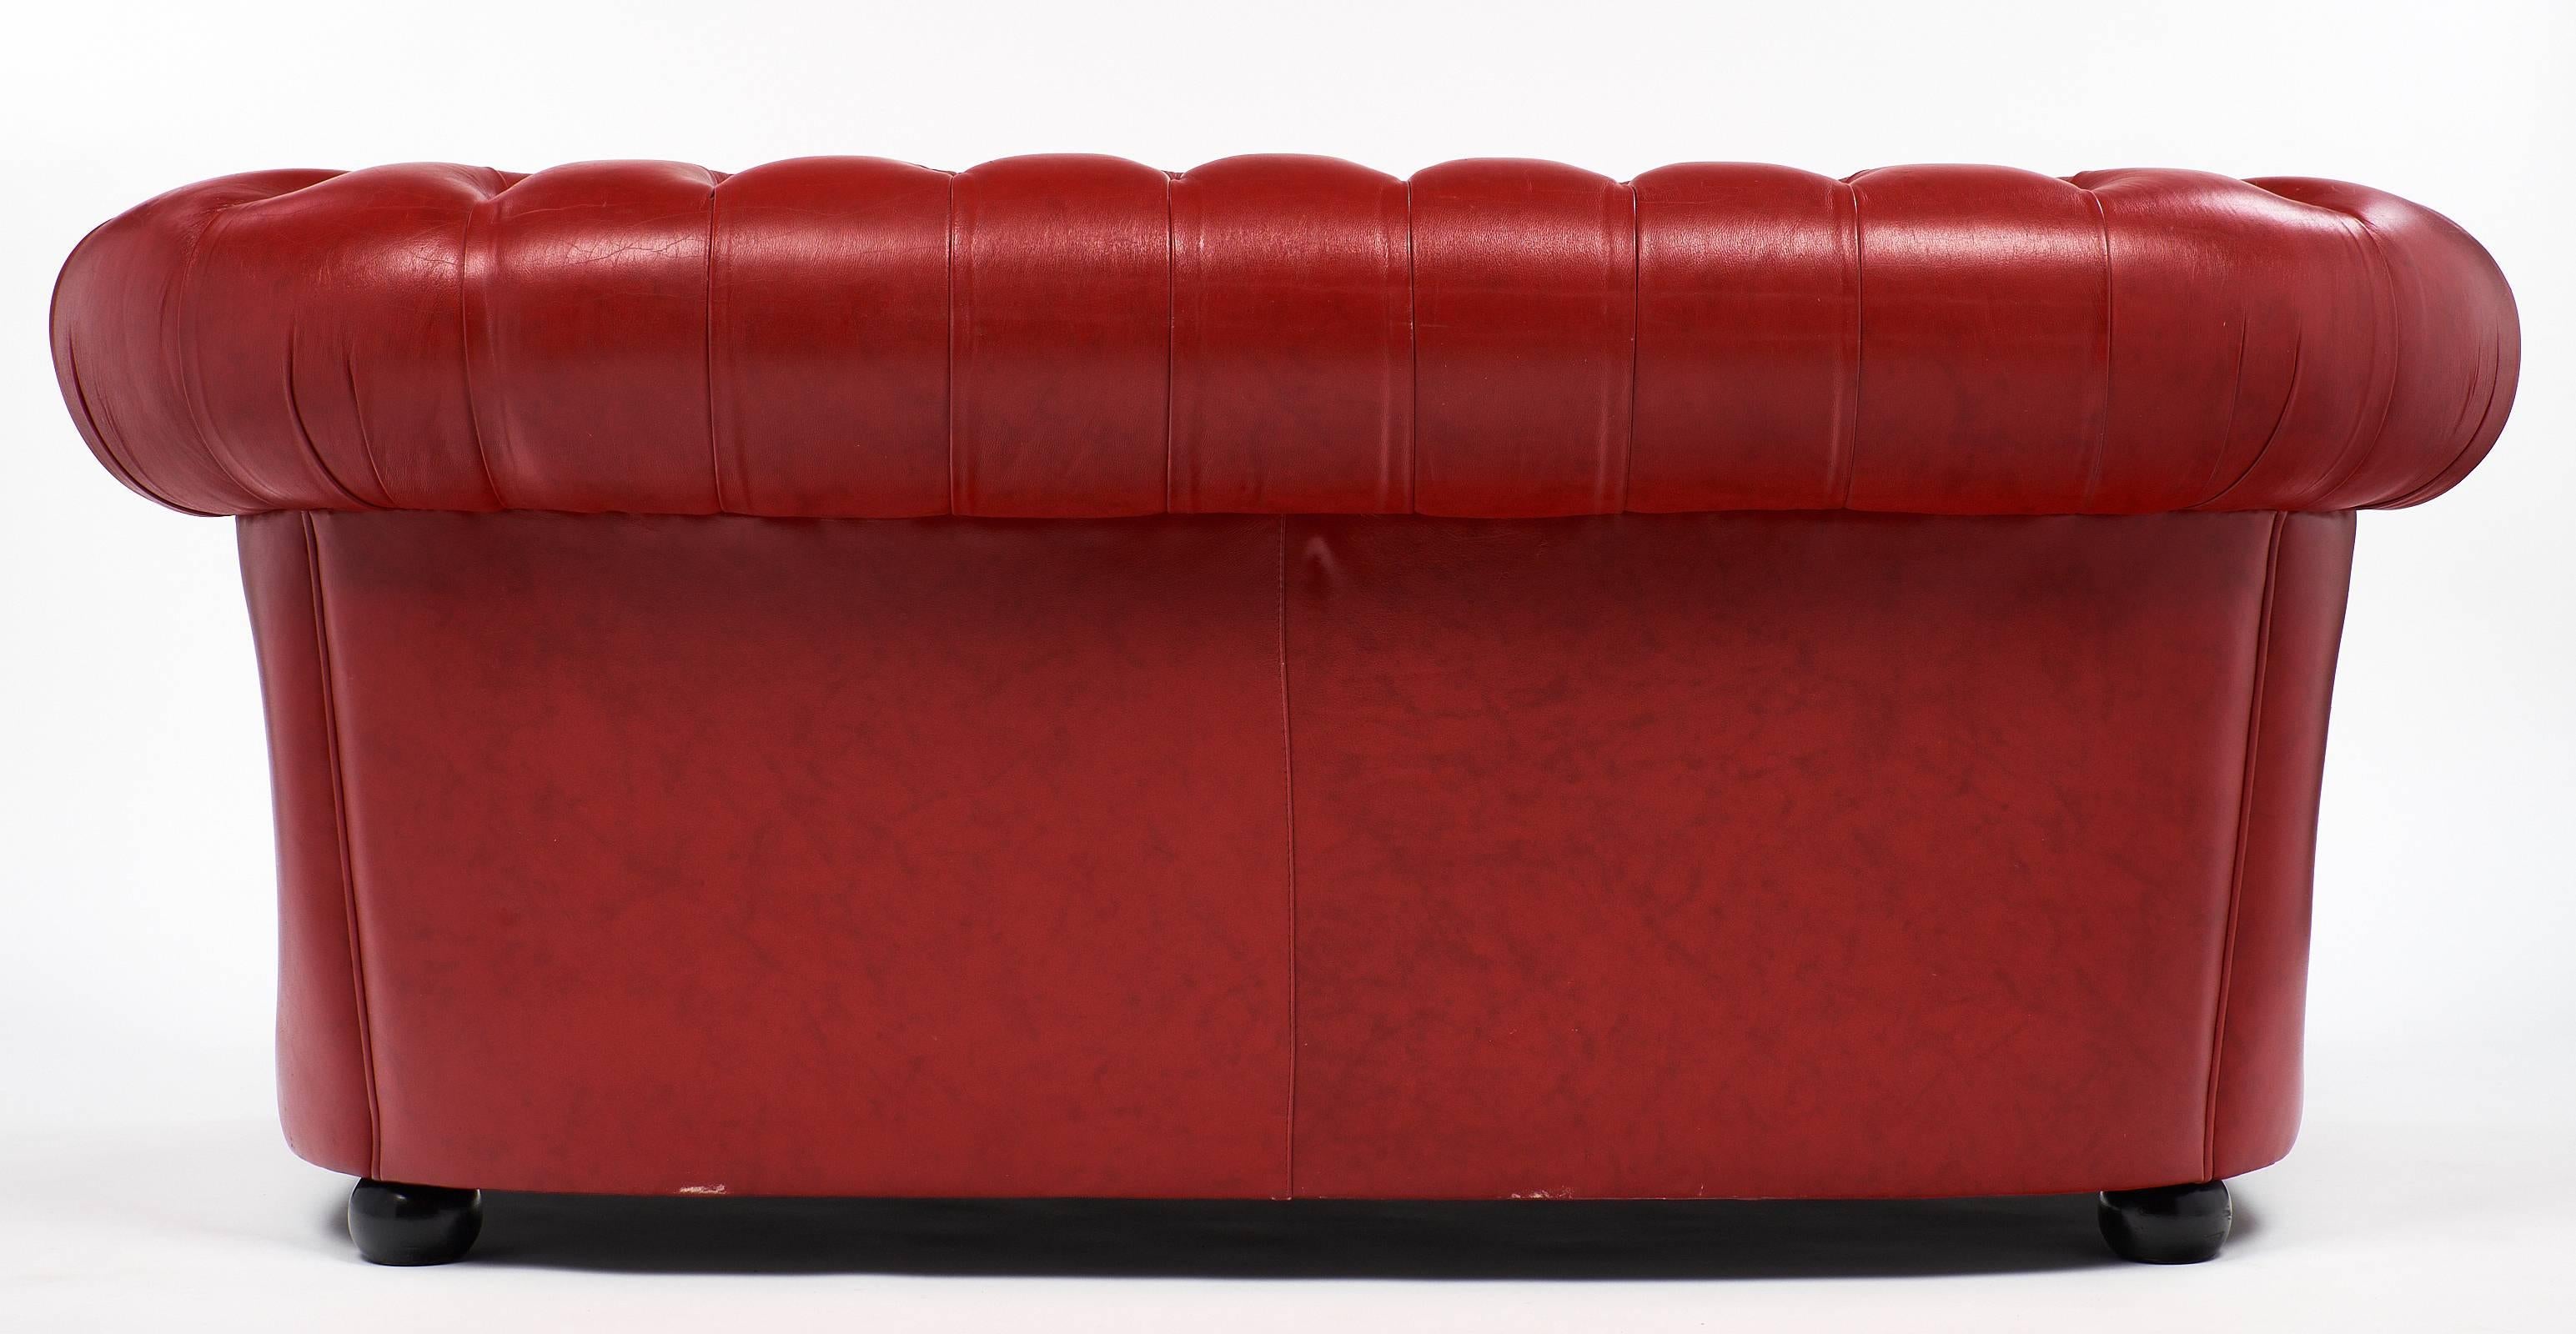 Leather Vintage English Red Chesterfield Sofa